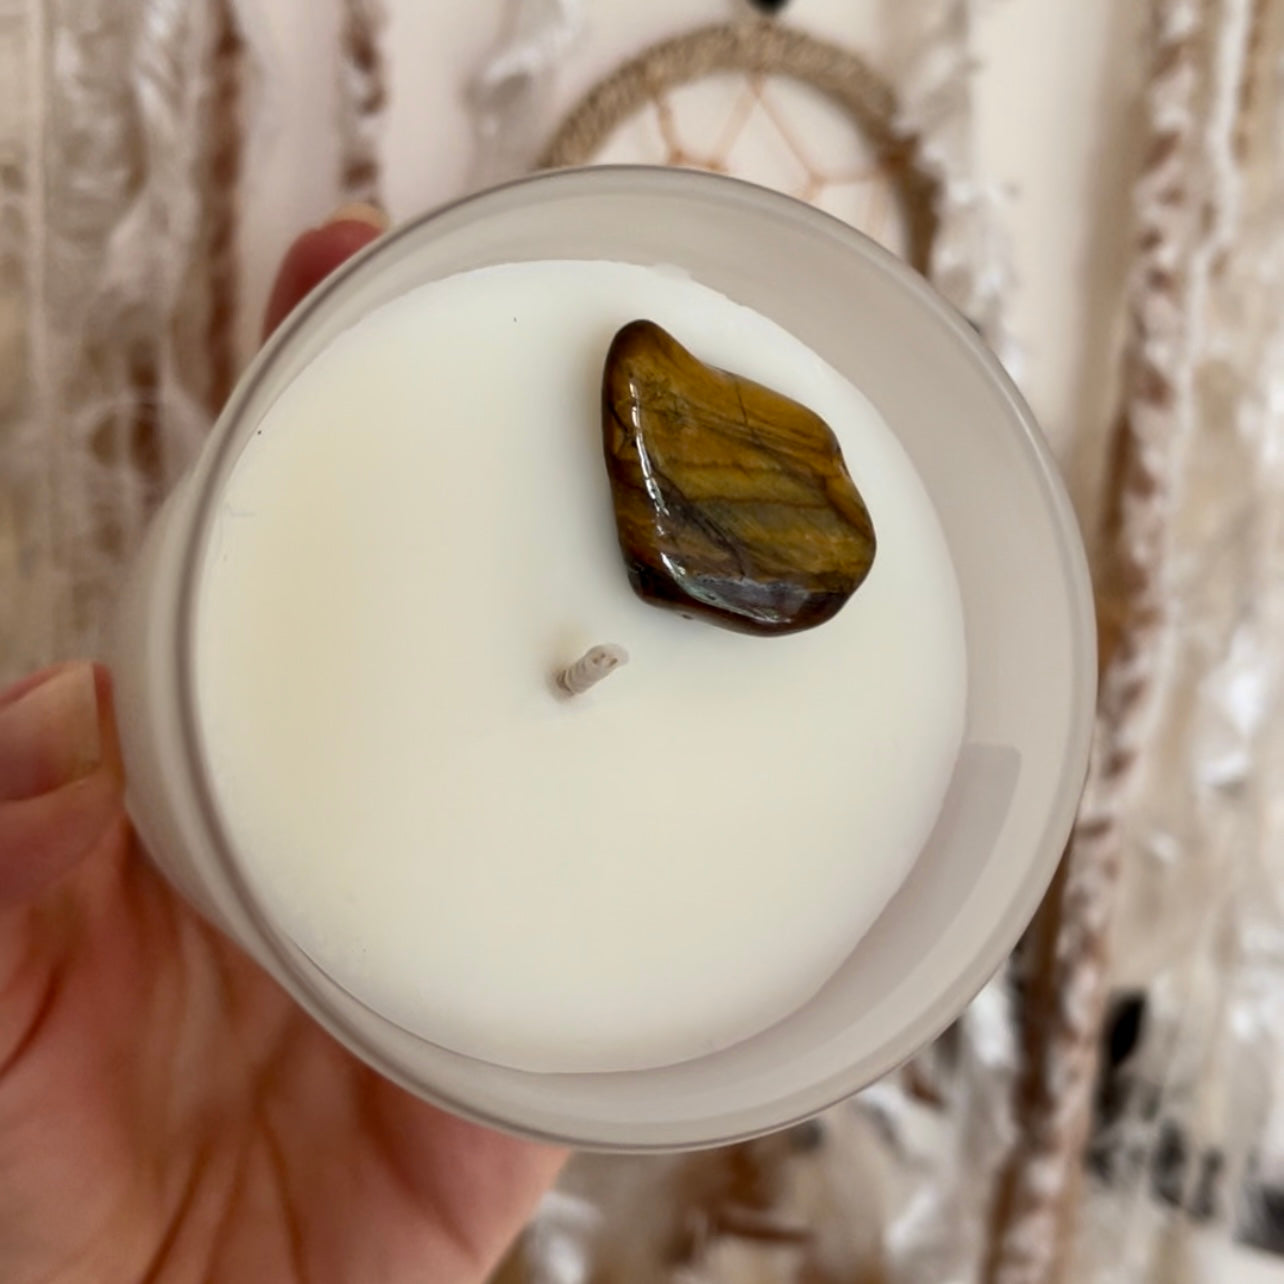 Summer Solstice Candle- Coconut, Peach, Almond & Musk Infused with Tigers Eye - 1 left in stock